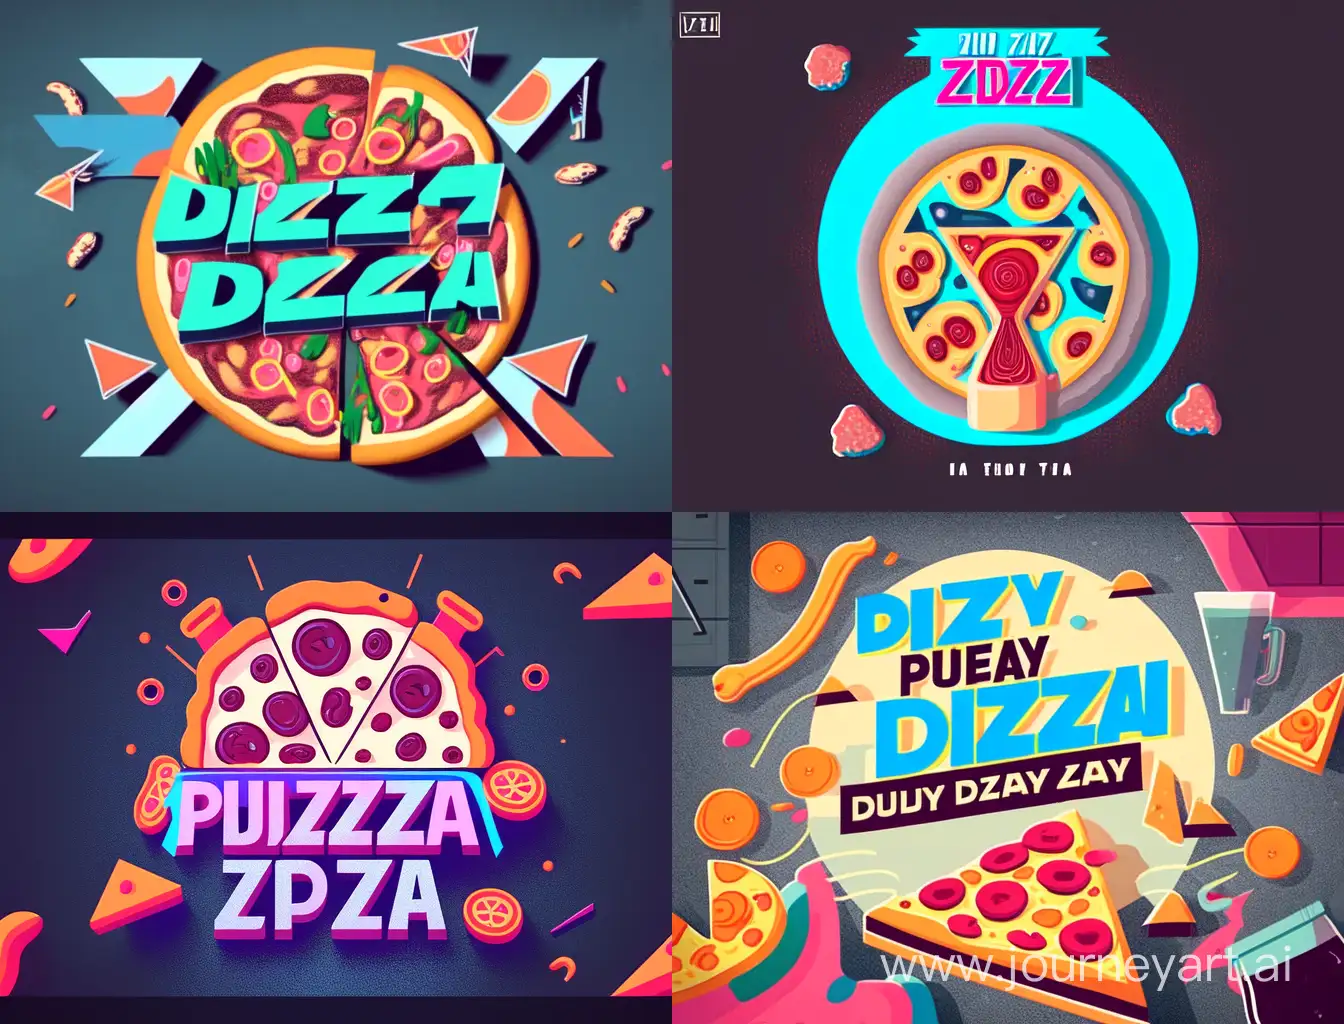 Create a greeting postcard for the International Pizza Day holiday in the style of the film Kin-Dza-Dza directed by Georgy Danelia of the USSR era in 1986 and replace the text "PIZ-ZA-DZA"